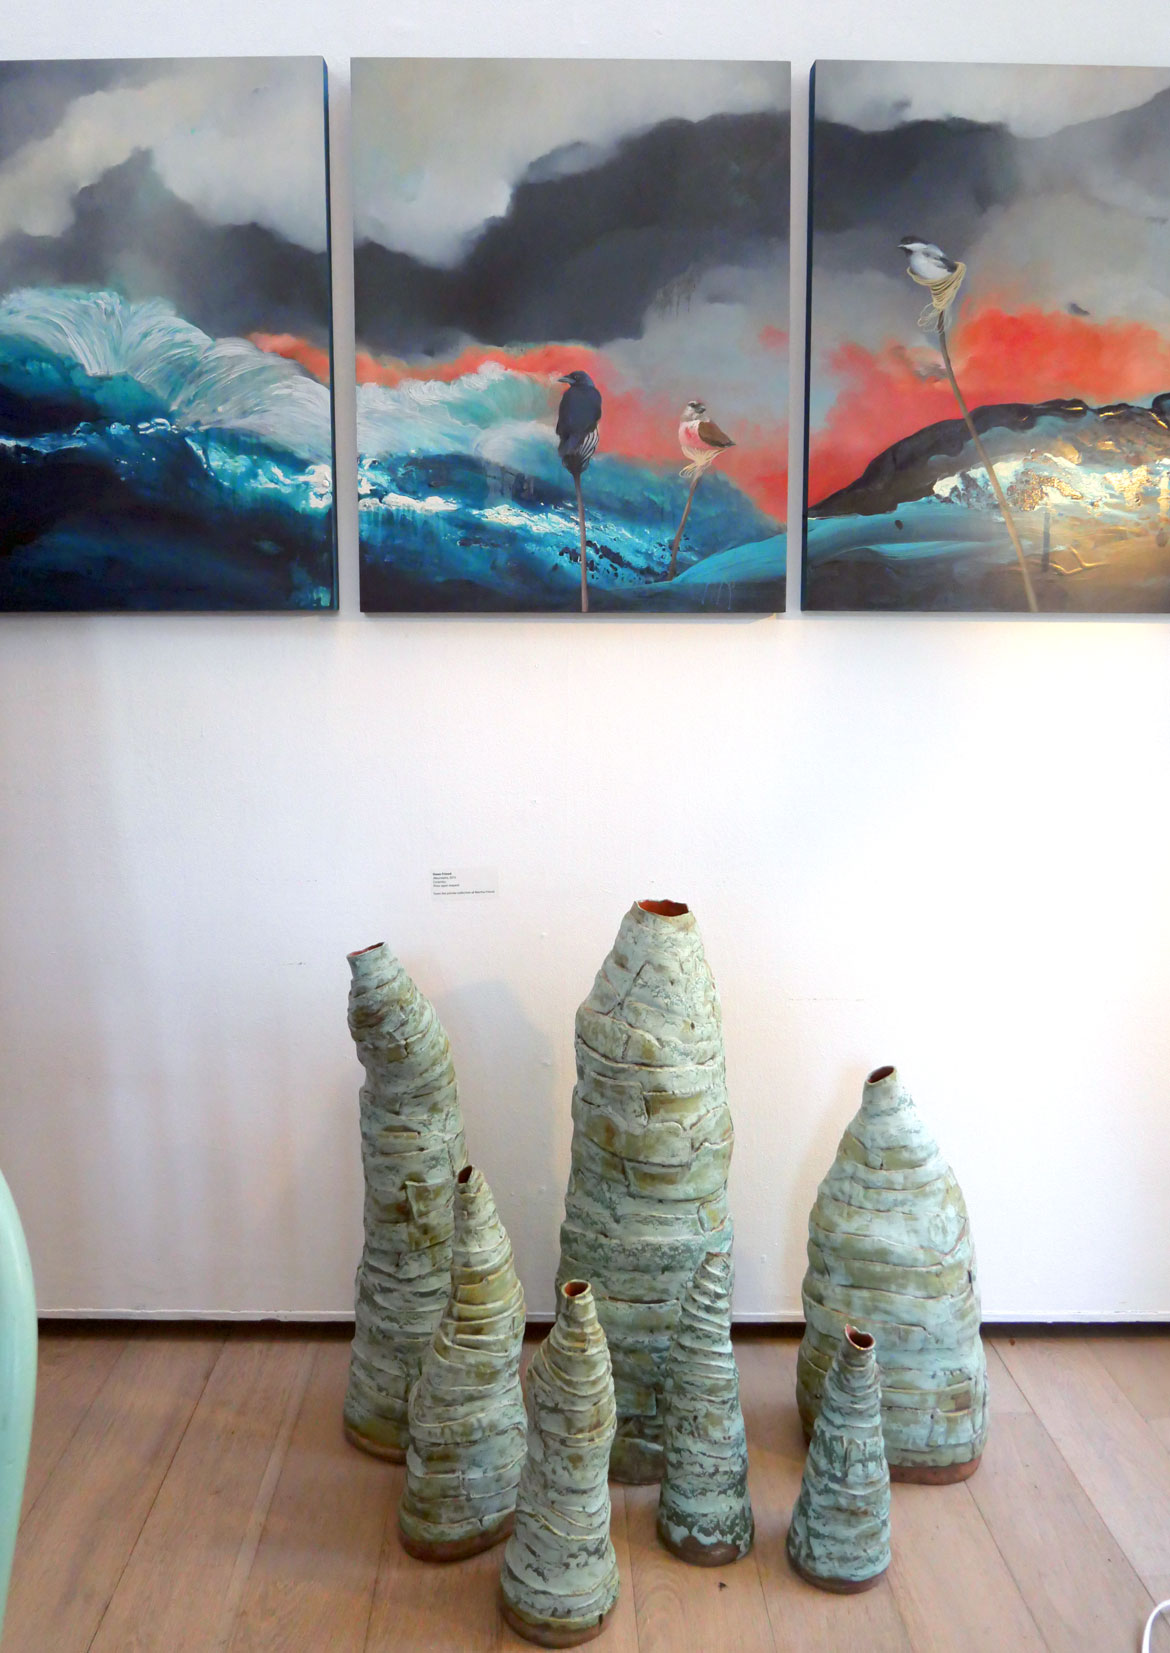 "Blue" at the Somerville Museum, with (on floor) Gwen Friend, "Mountains," 2015, ceramics.